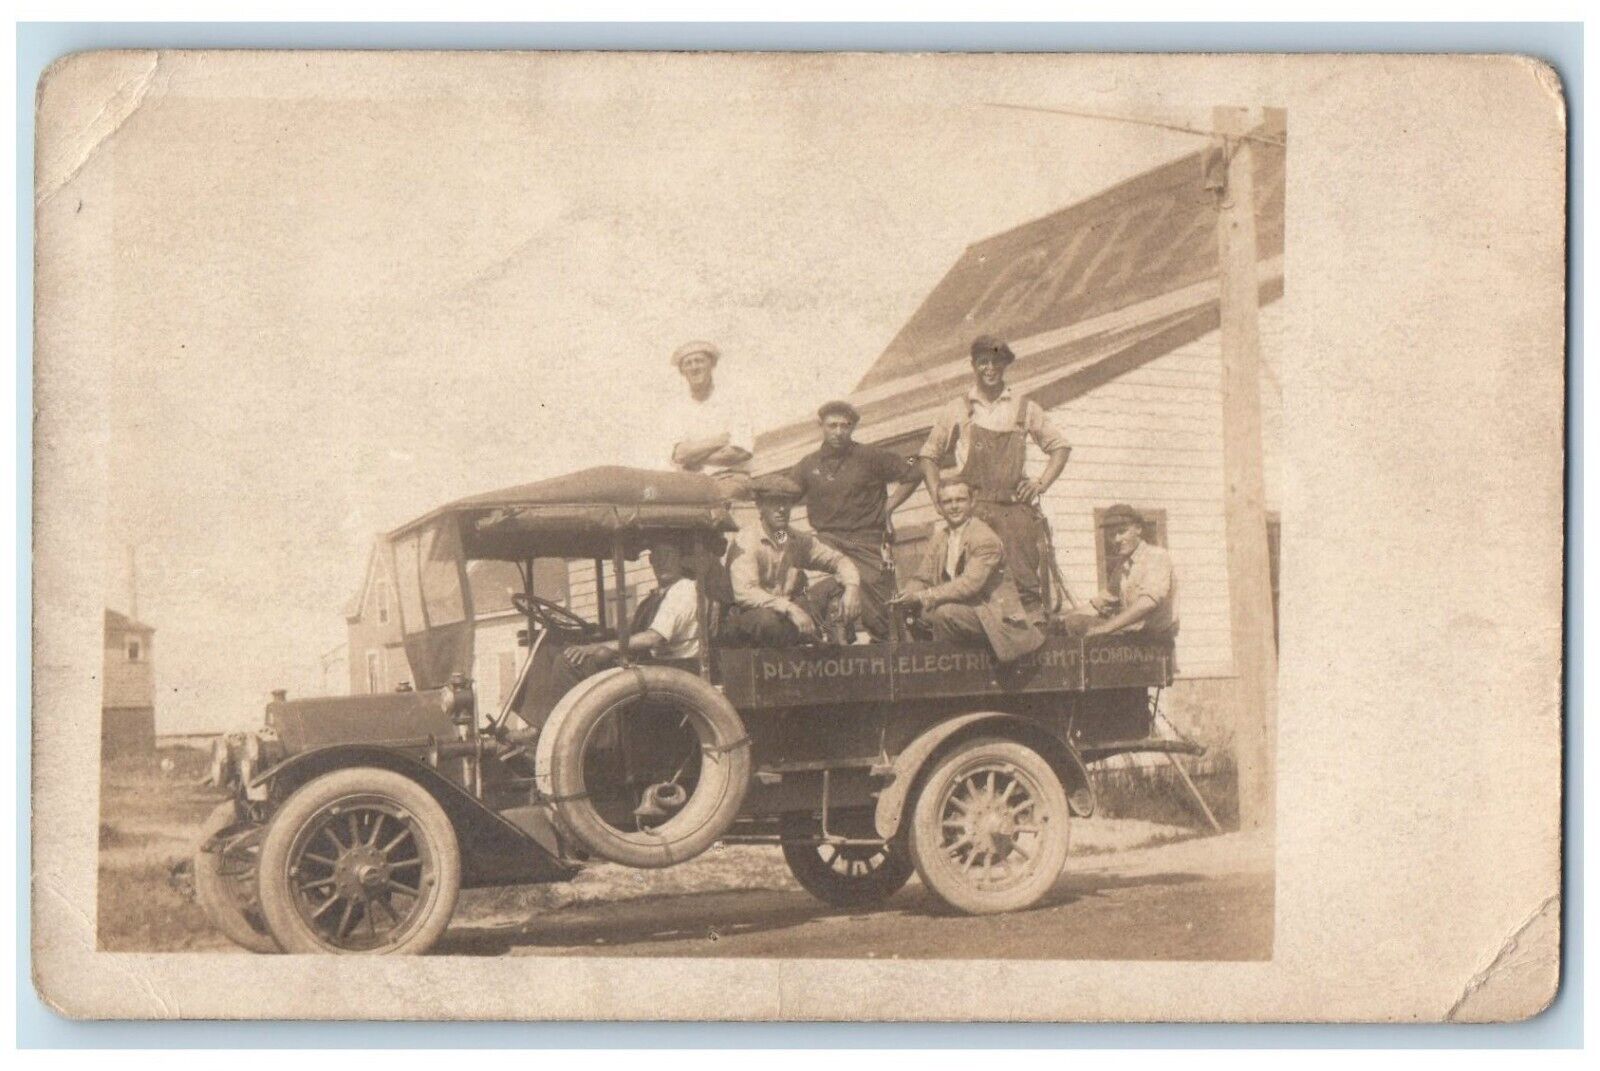 c1910's Plymouth Electric Light Company Truck Employees RPPC Photo Postcard